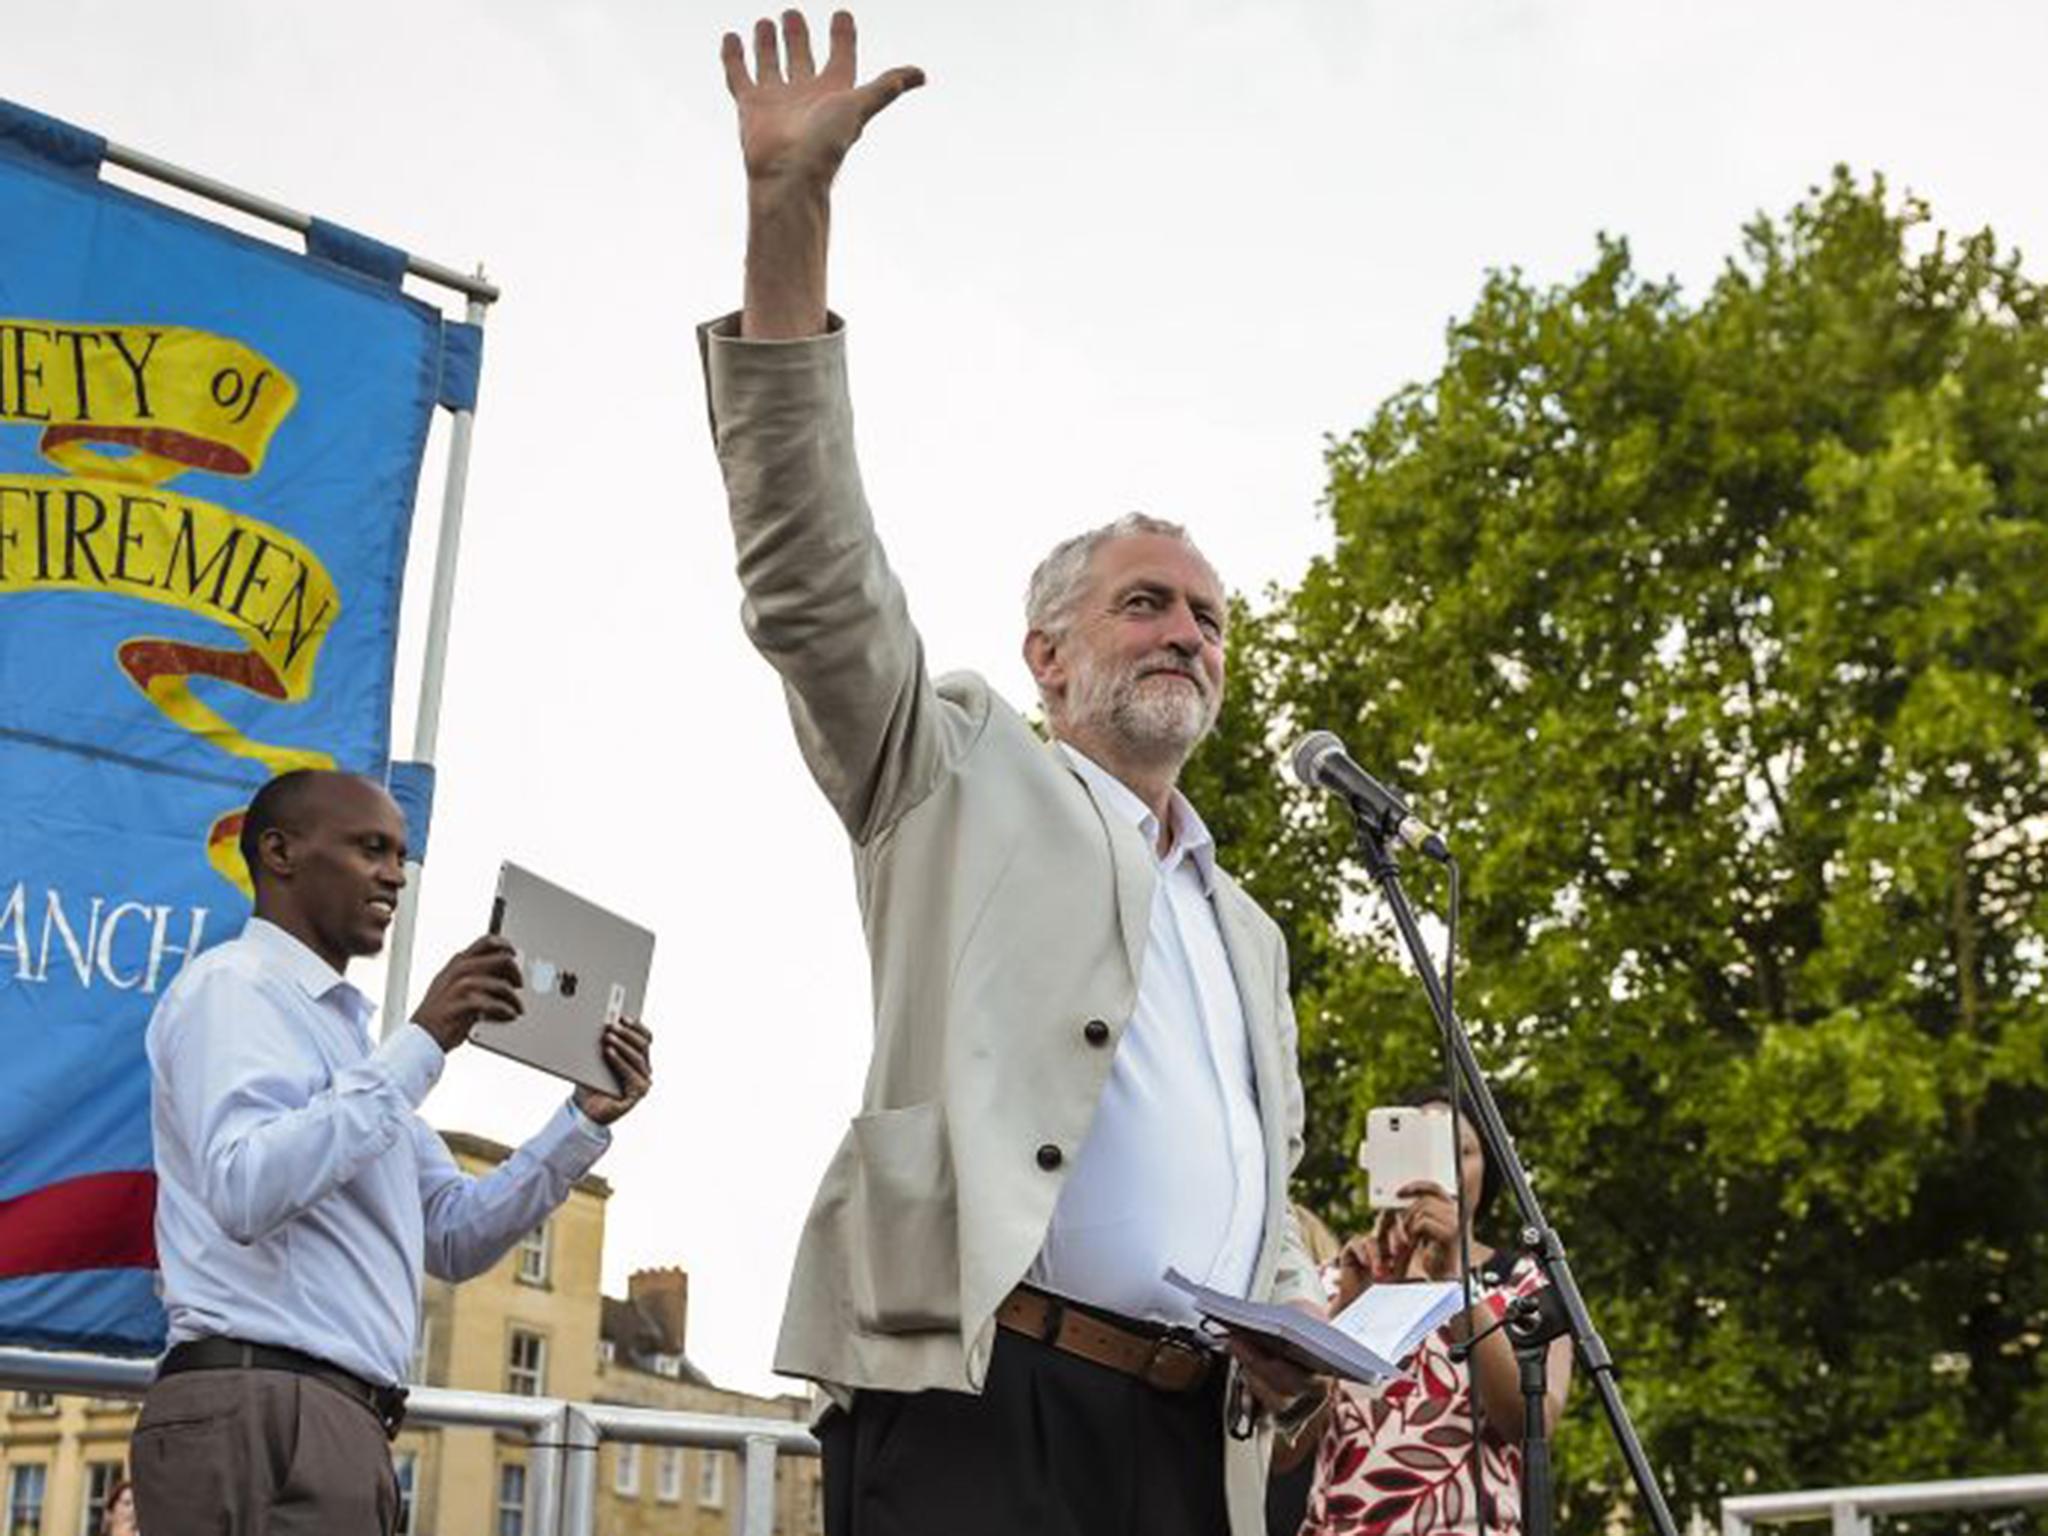 &#13;
Jeremy Corbyn at a Labour leadership hustings in College Green, Bristol &#13;